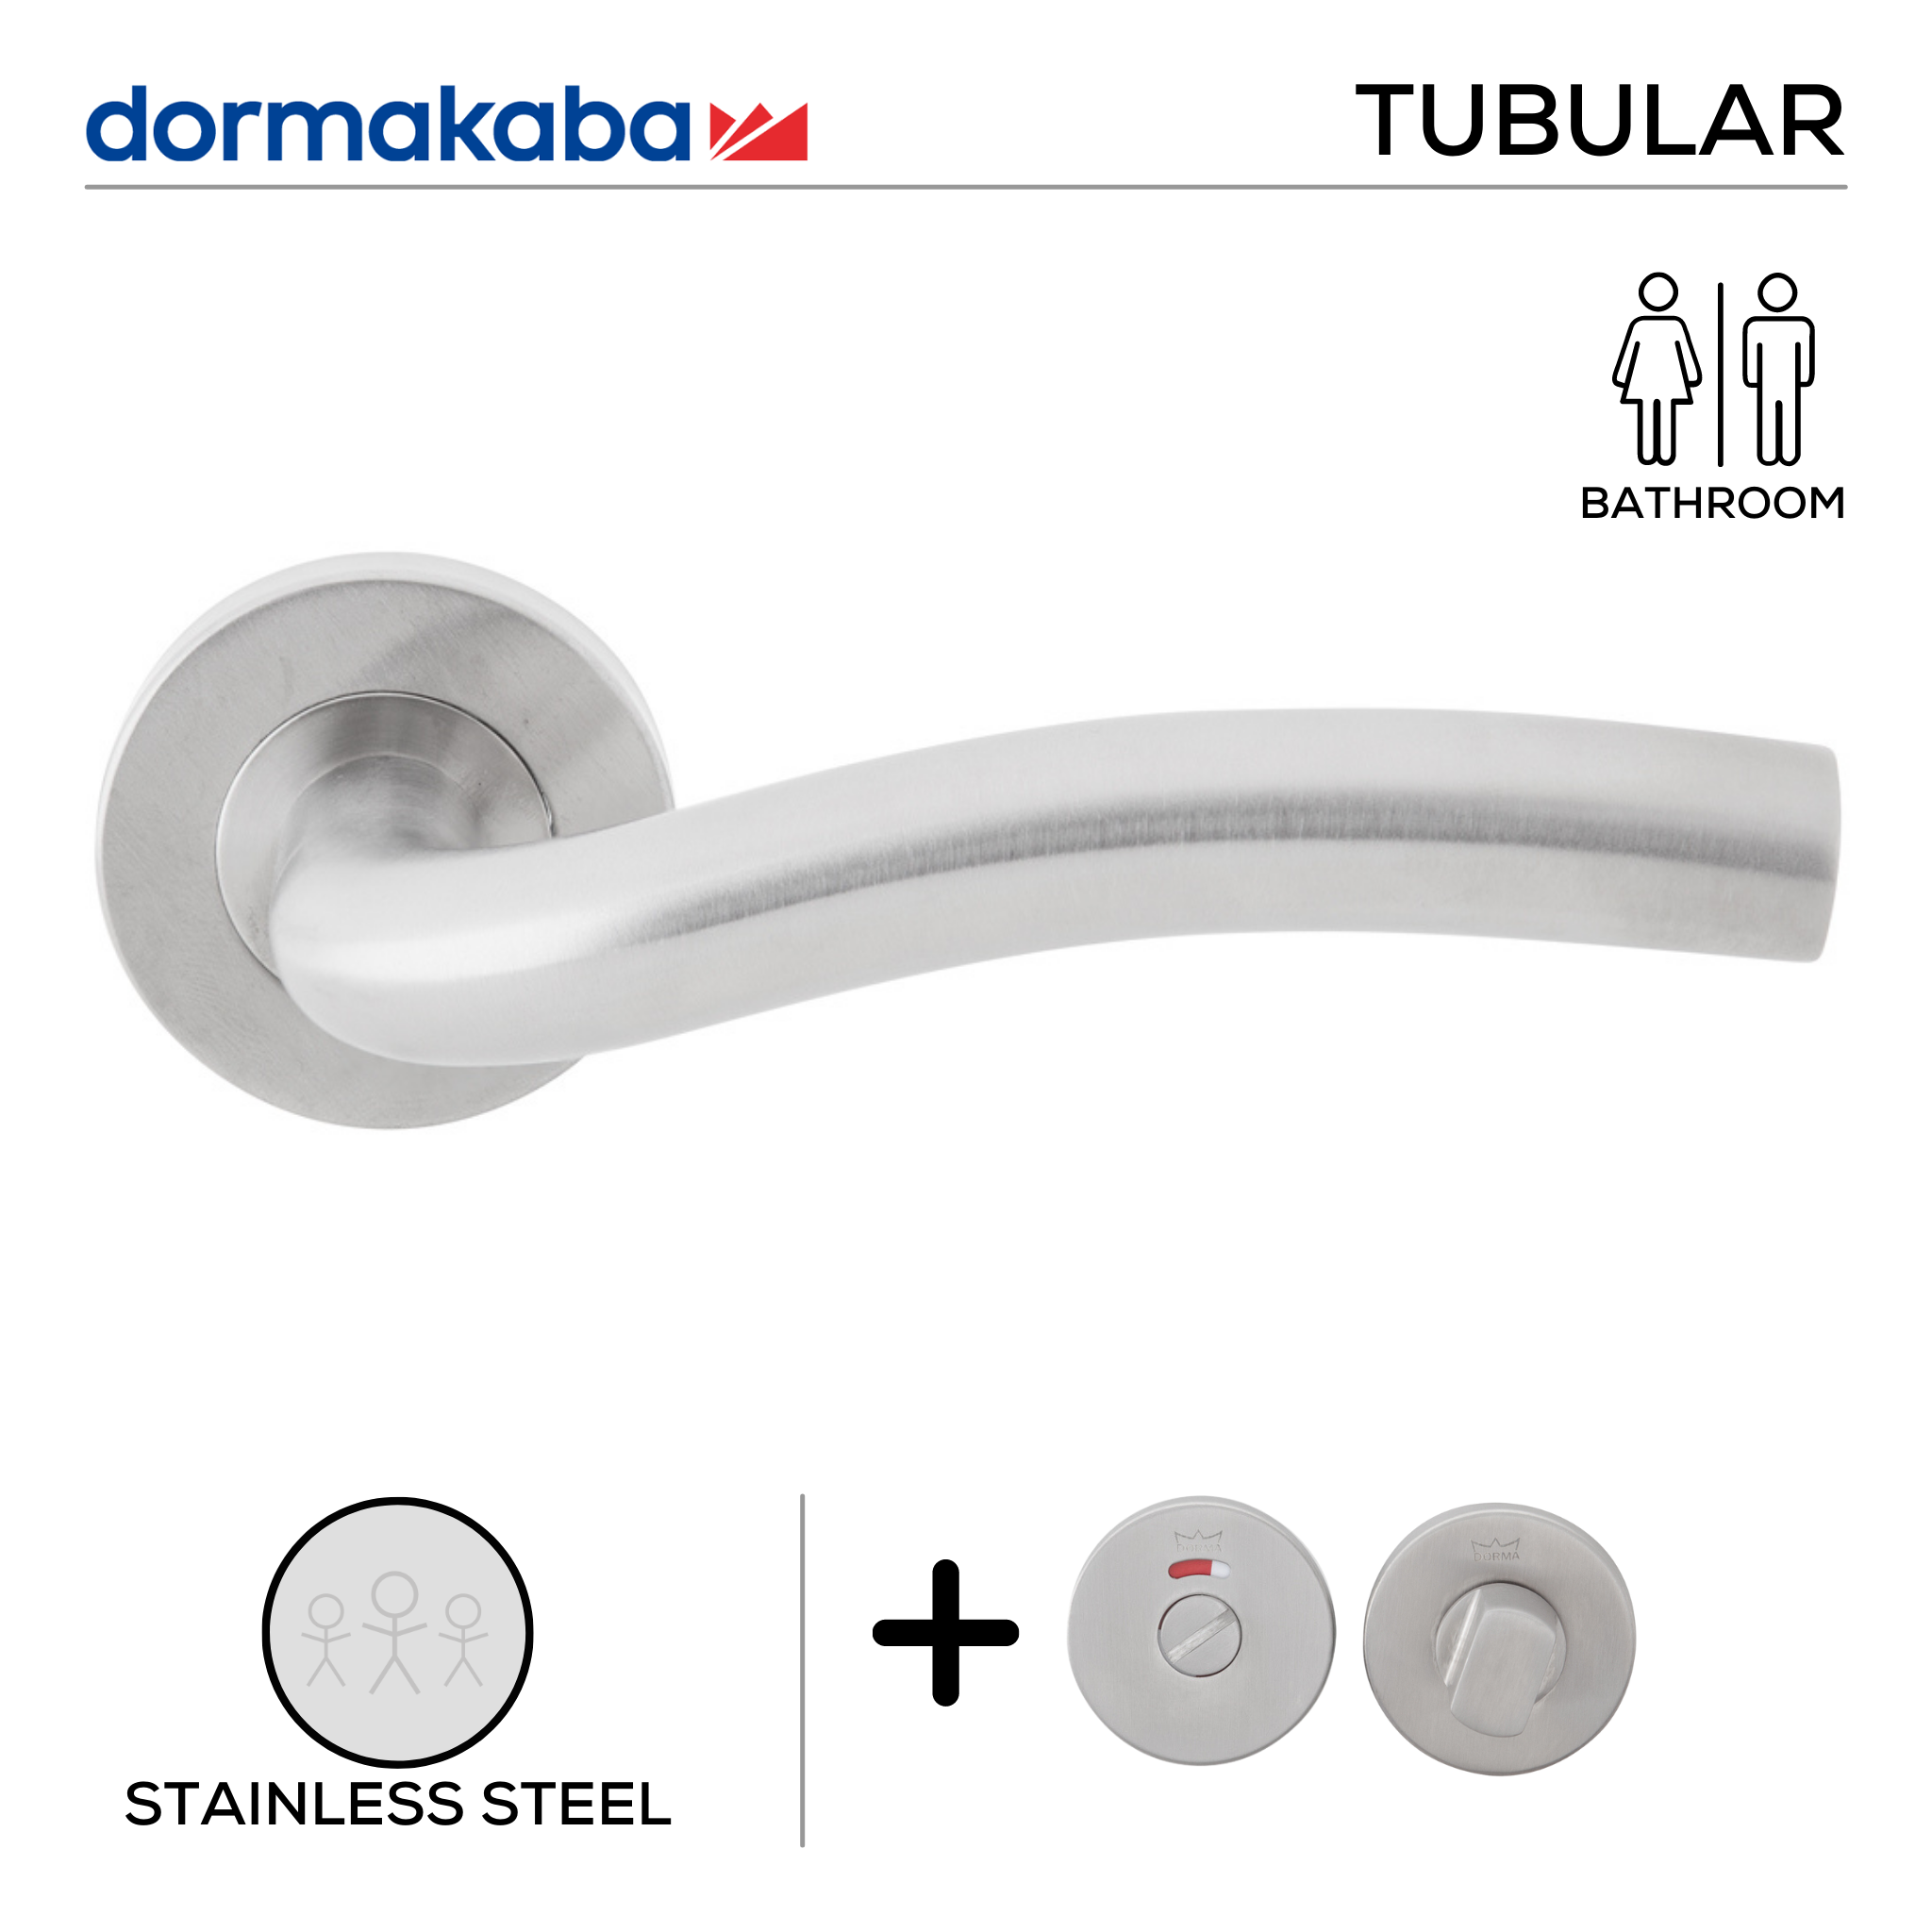 TH 122 Bathroom W/C, Lever Handles, Tubular, On Round Rose, With Bathroom (WC) Indicator Set - DWC 005, 148mm (l), Stainless Steel, DORMAKABA